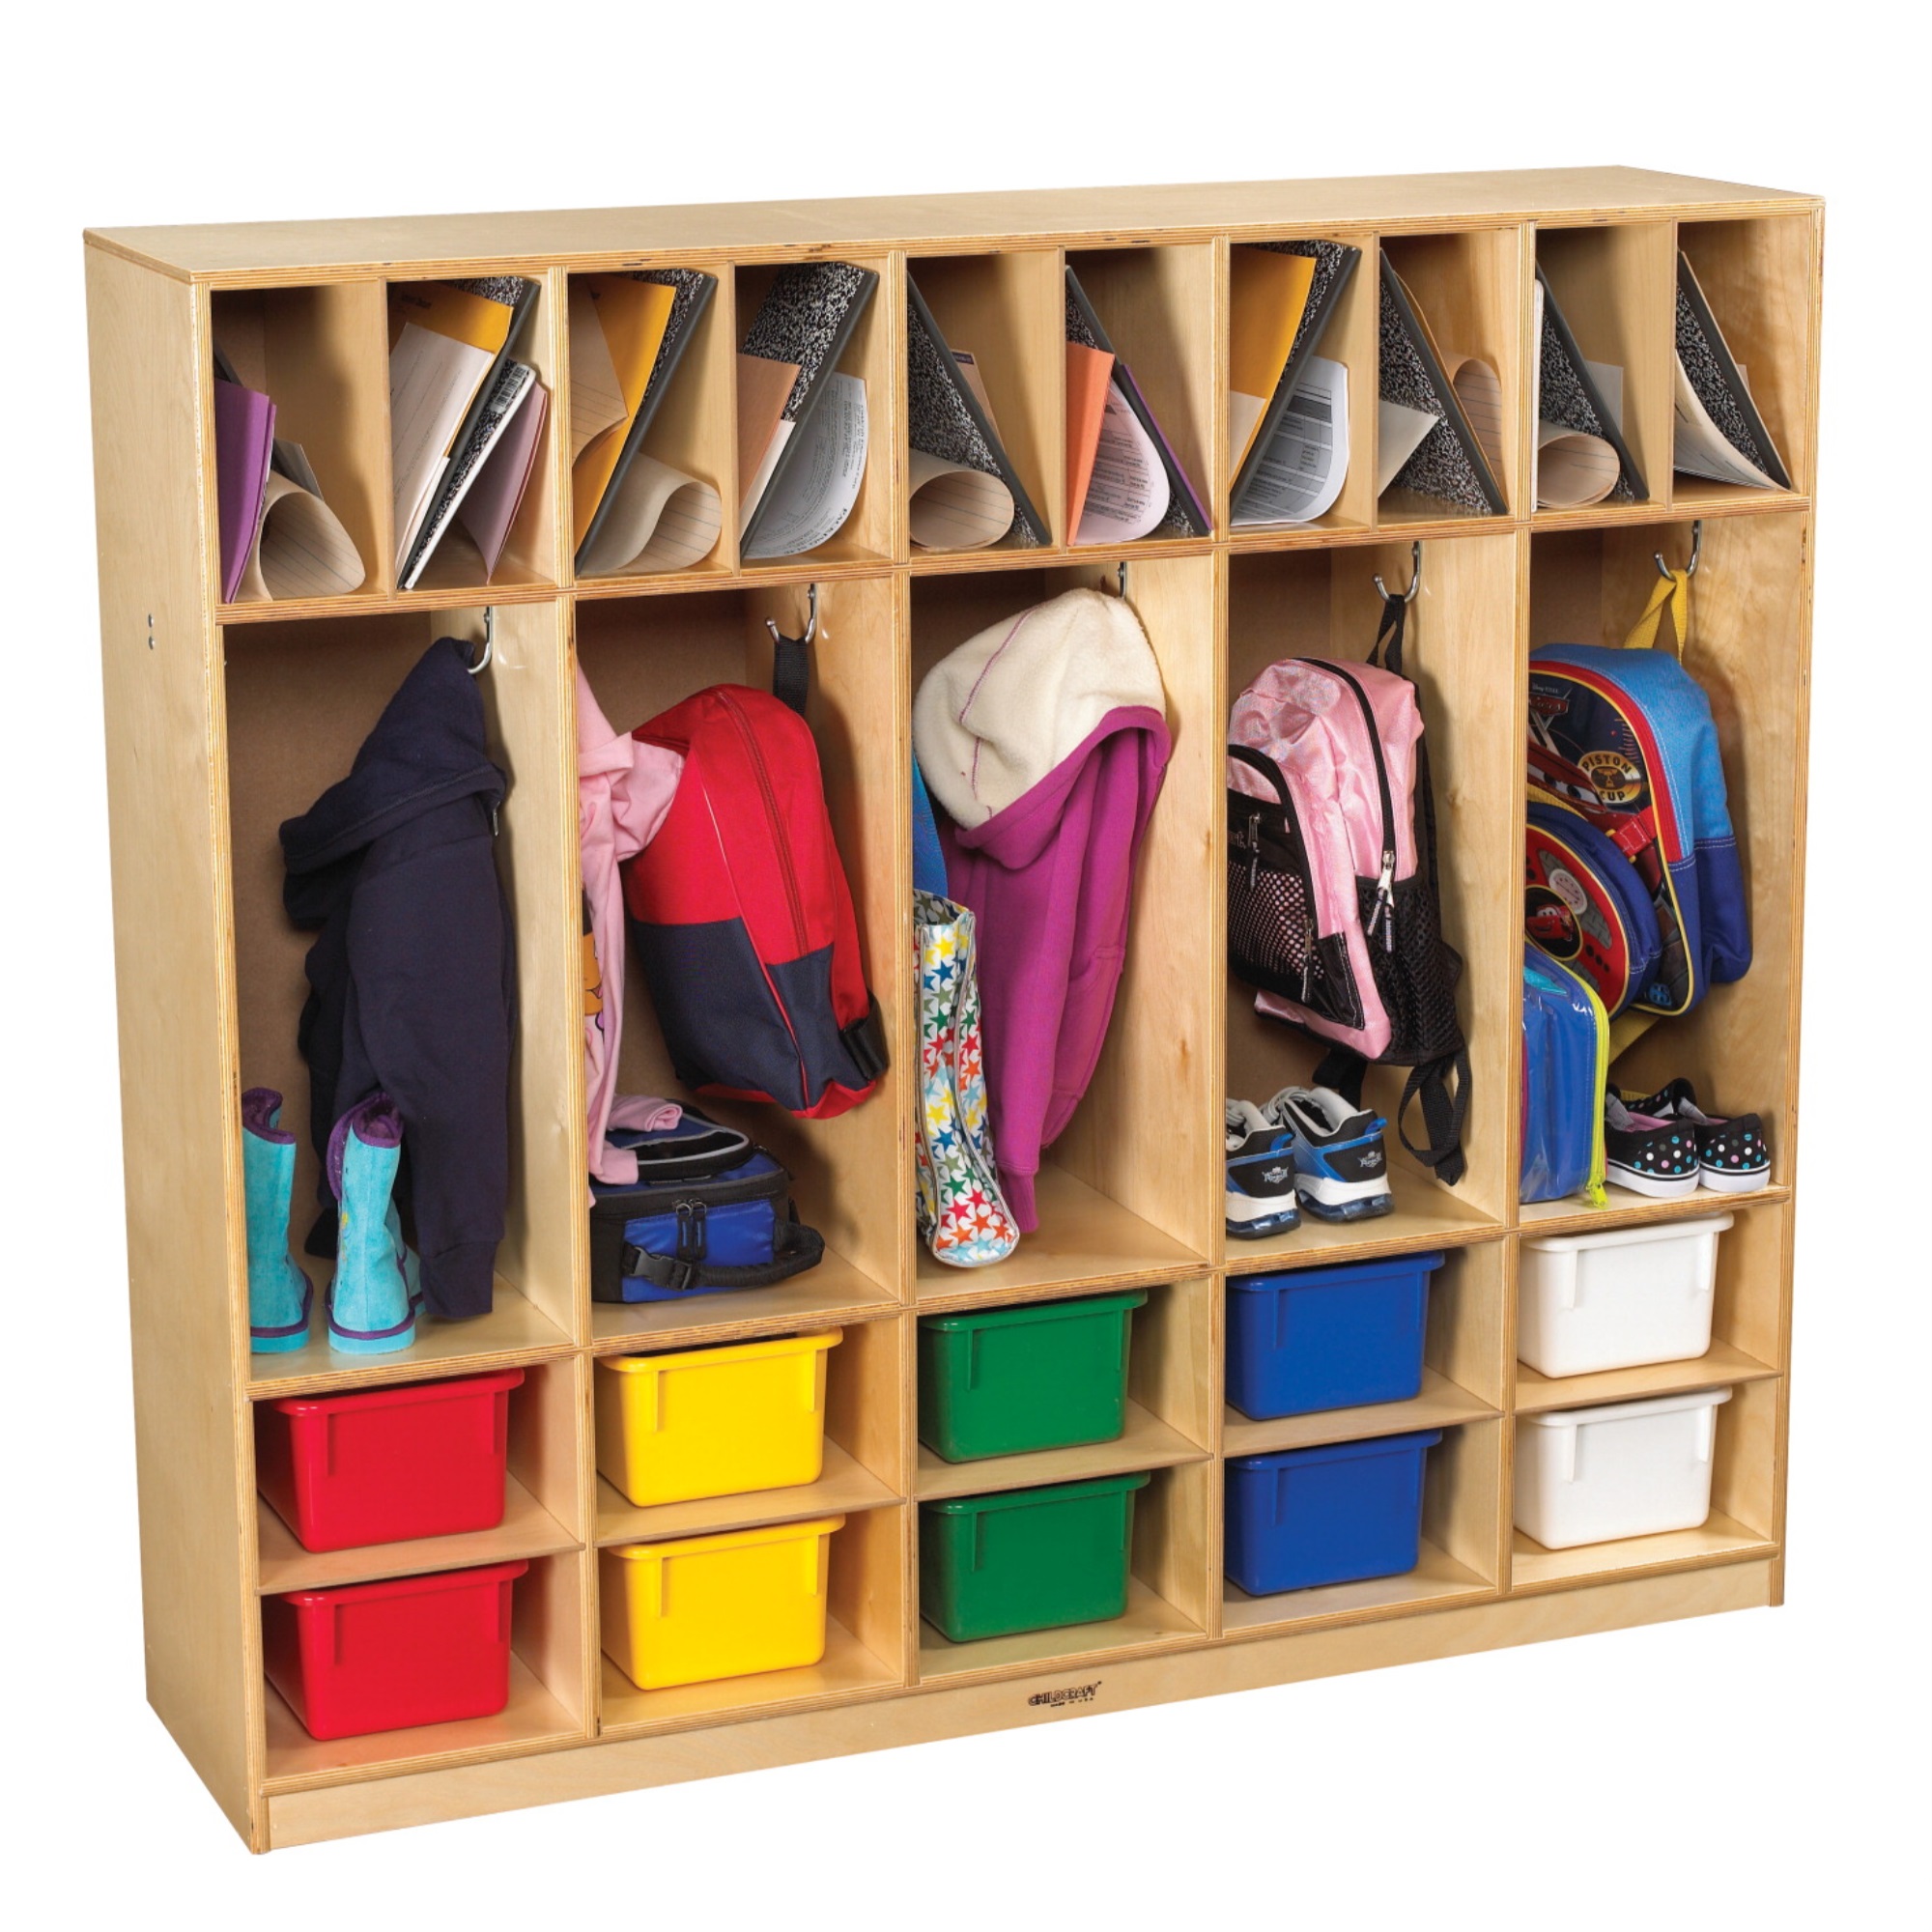 Childcraft Double-Tub Coat Locker with 10 Assorted Color Trays, 53-3/4 x 13-3/4 x 48 Inches